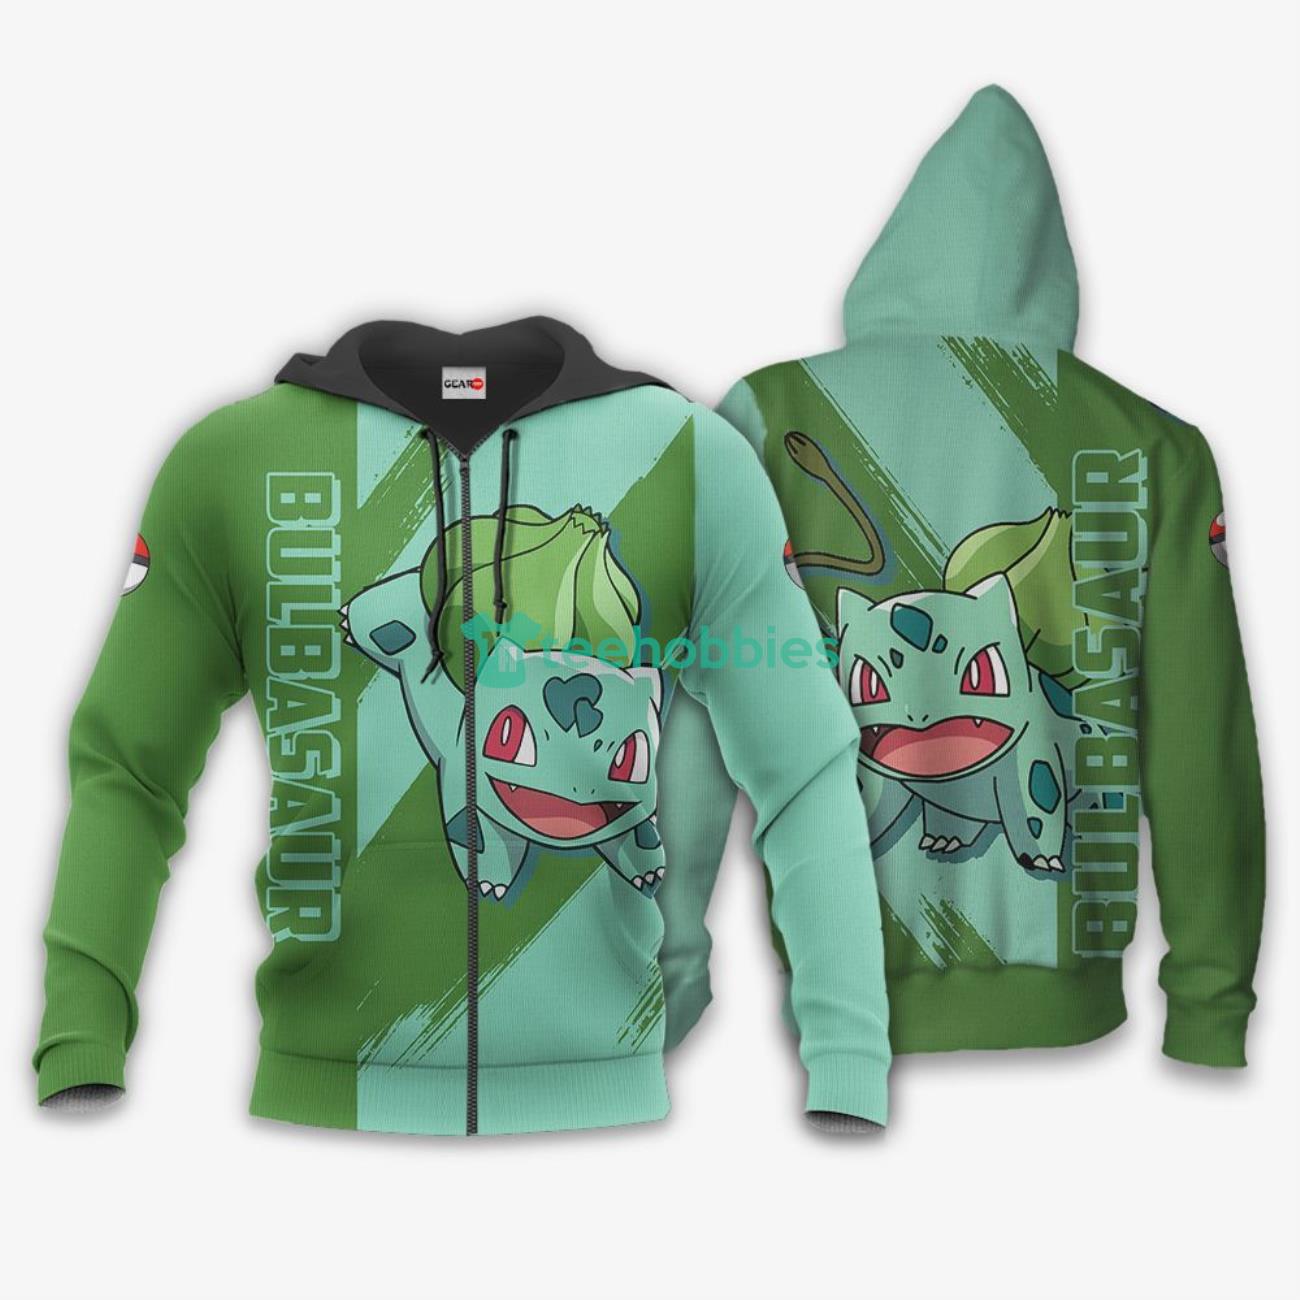 Pokemon Bulbasaur All Over Printed 3D Shirt Anime Fans Product Photo 1 Product photo 1